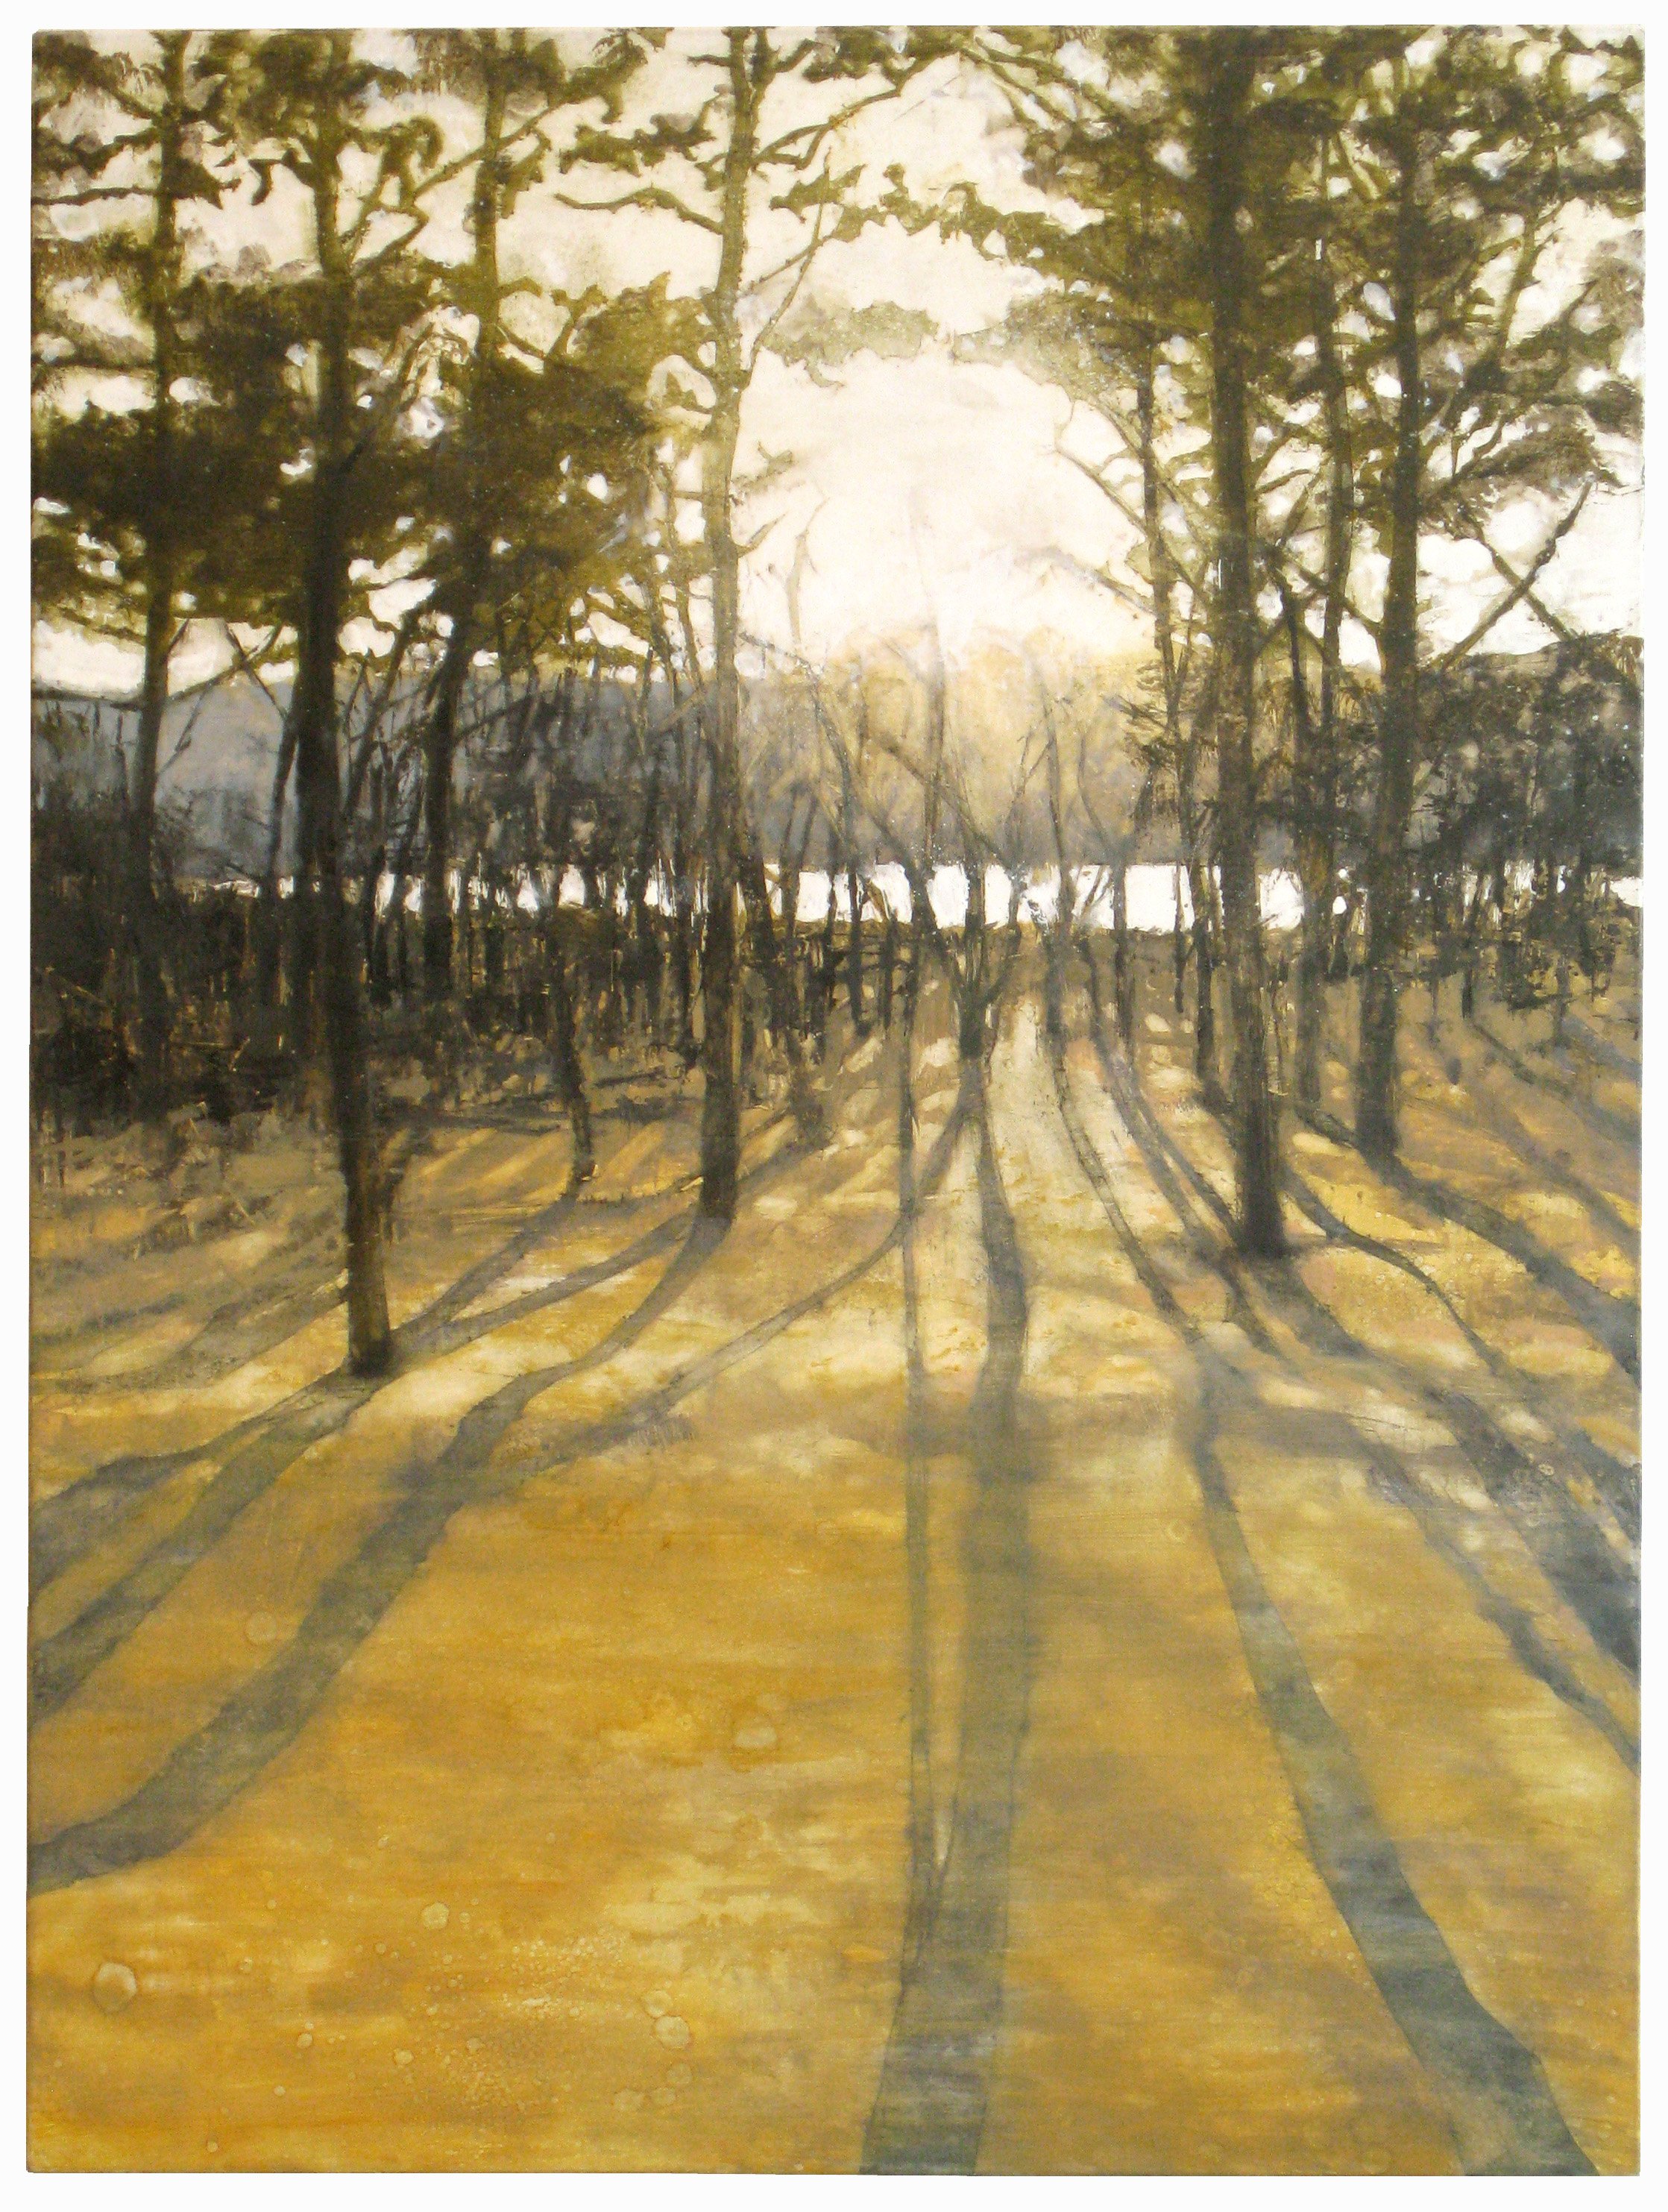  Beech Forest 3 40x30 inches (101x76cm) Oil on linen 2012 